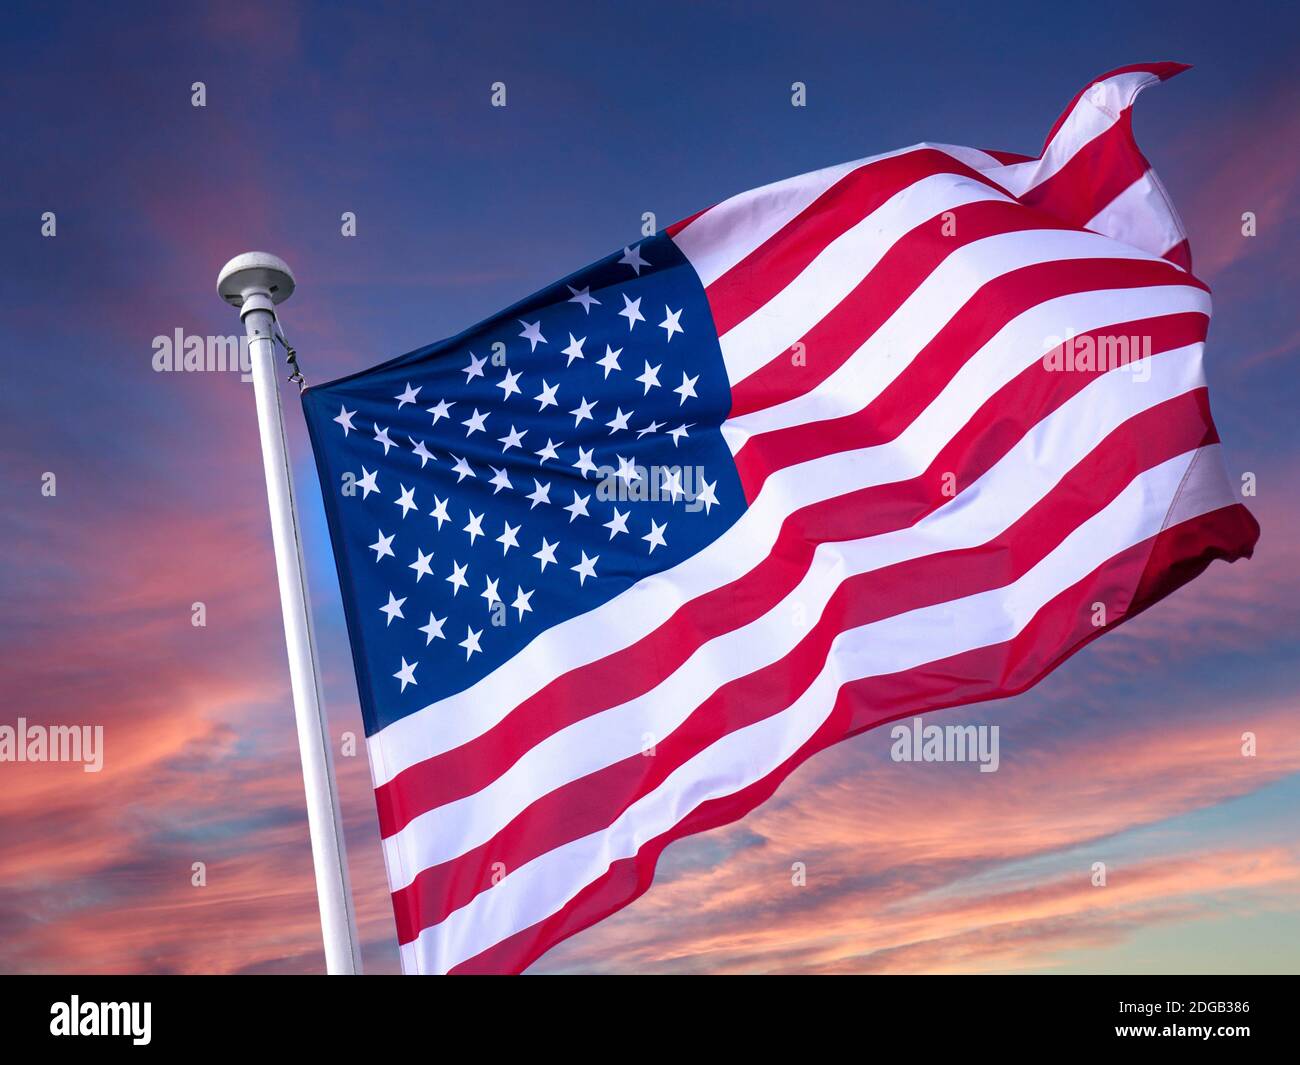 AMERICAN FLAG STARS & STRIPES SKY FLYING USA United States America American Stars and Stripes flag flying clean fresh, in breeze with red sunrise sky behind Stock Photo